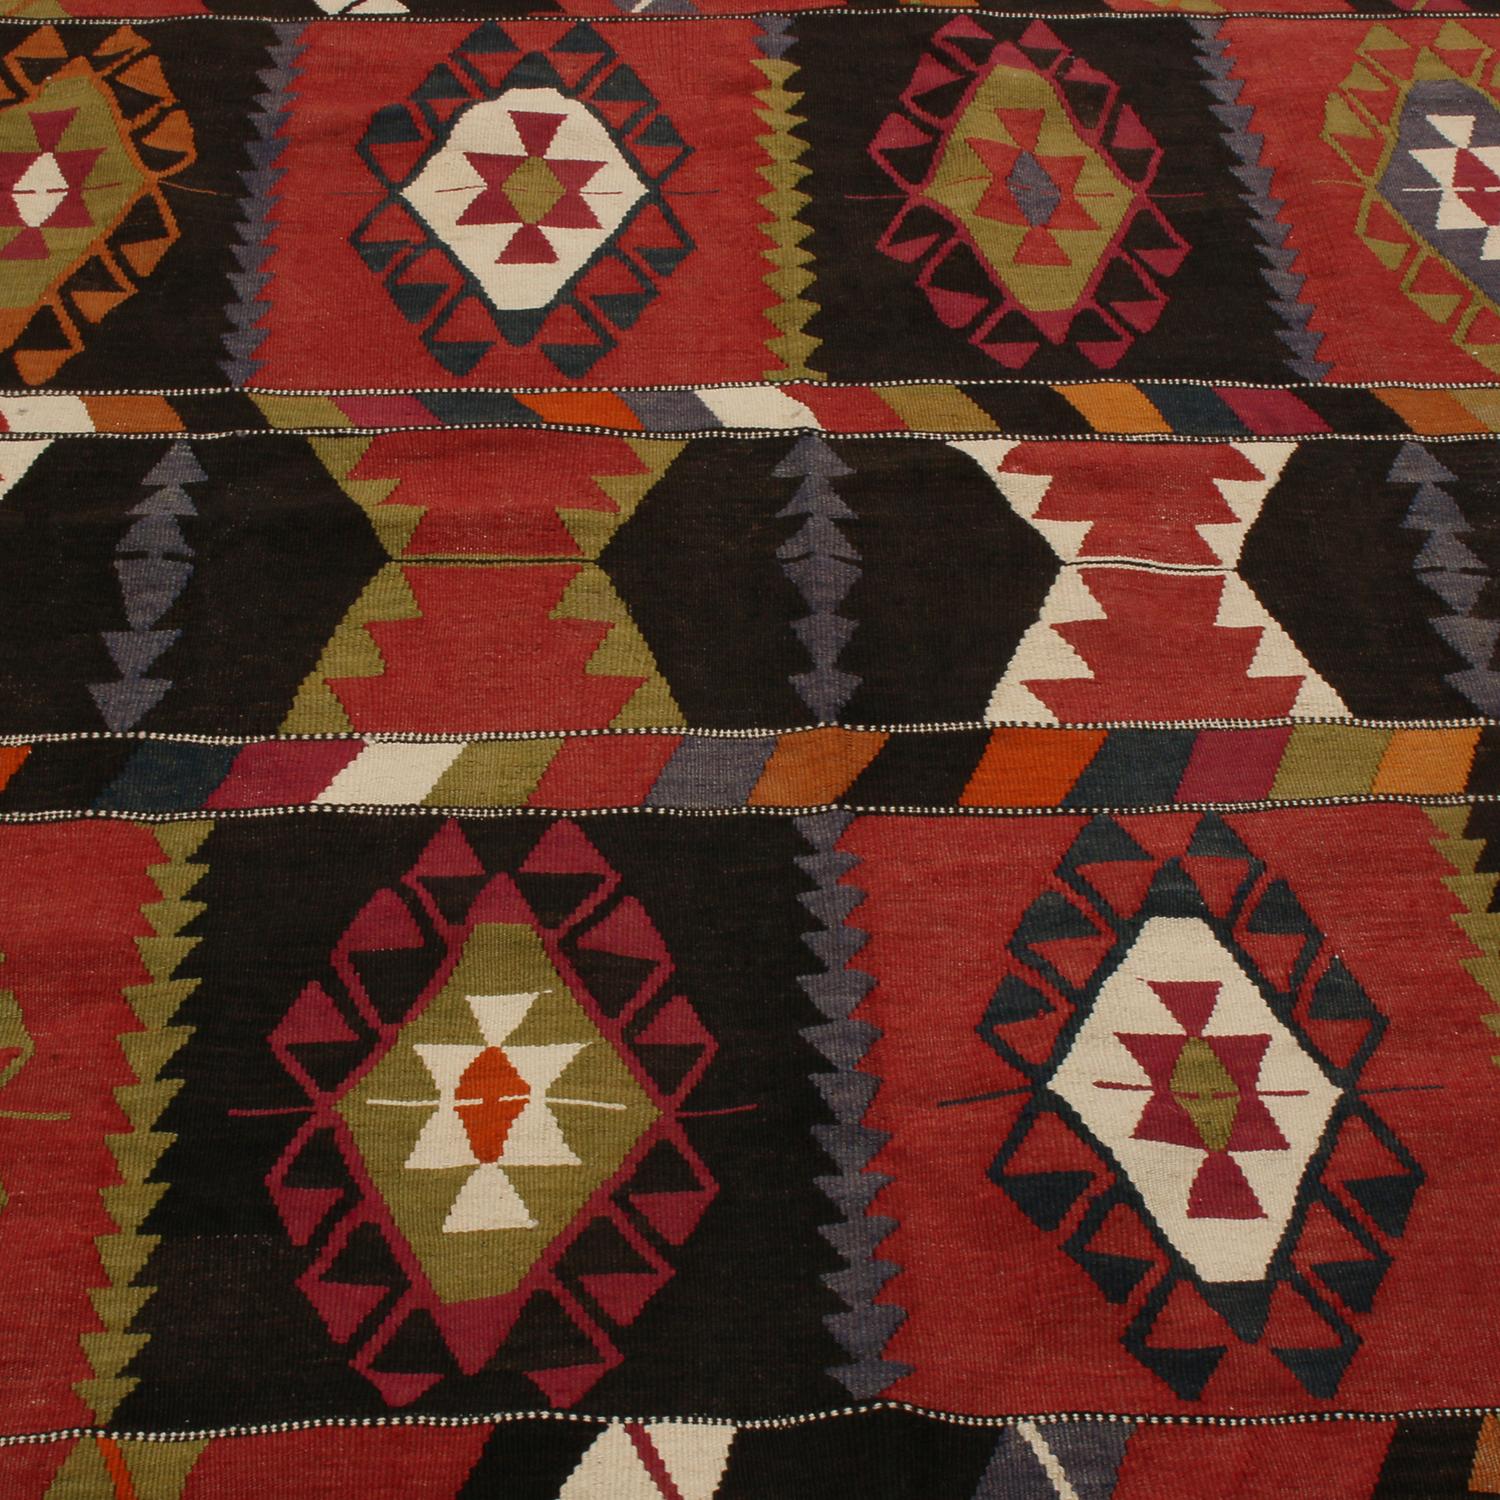 Flat-woven in high-quality wool originating from Turkey between 1940-1950, this vintage Esme Kilim rug enjoys one of the most unique variations of individualistic colorways throughout its patterns, celebrating multi-tonal hues of red, green, blue,